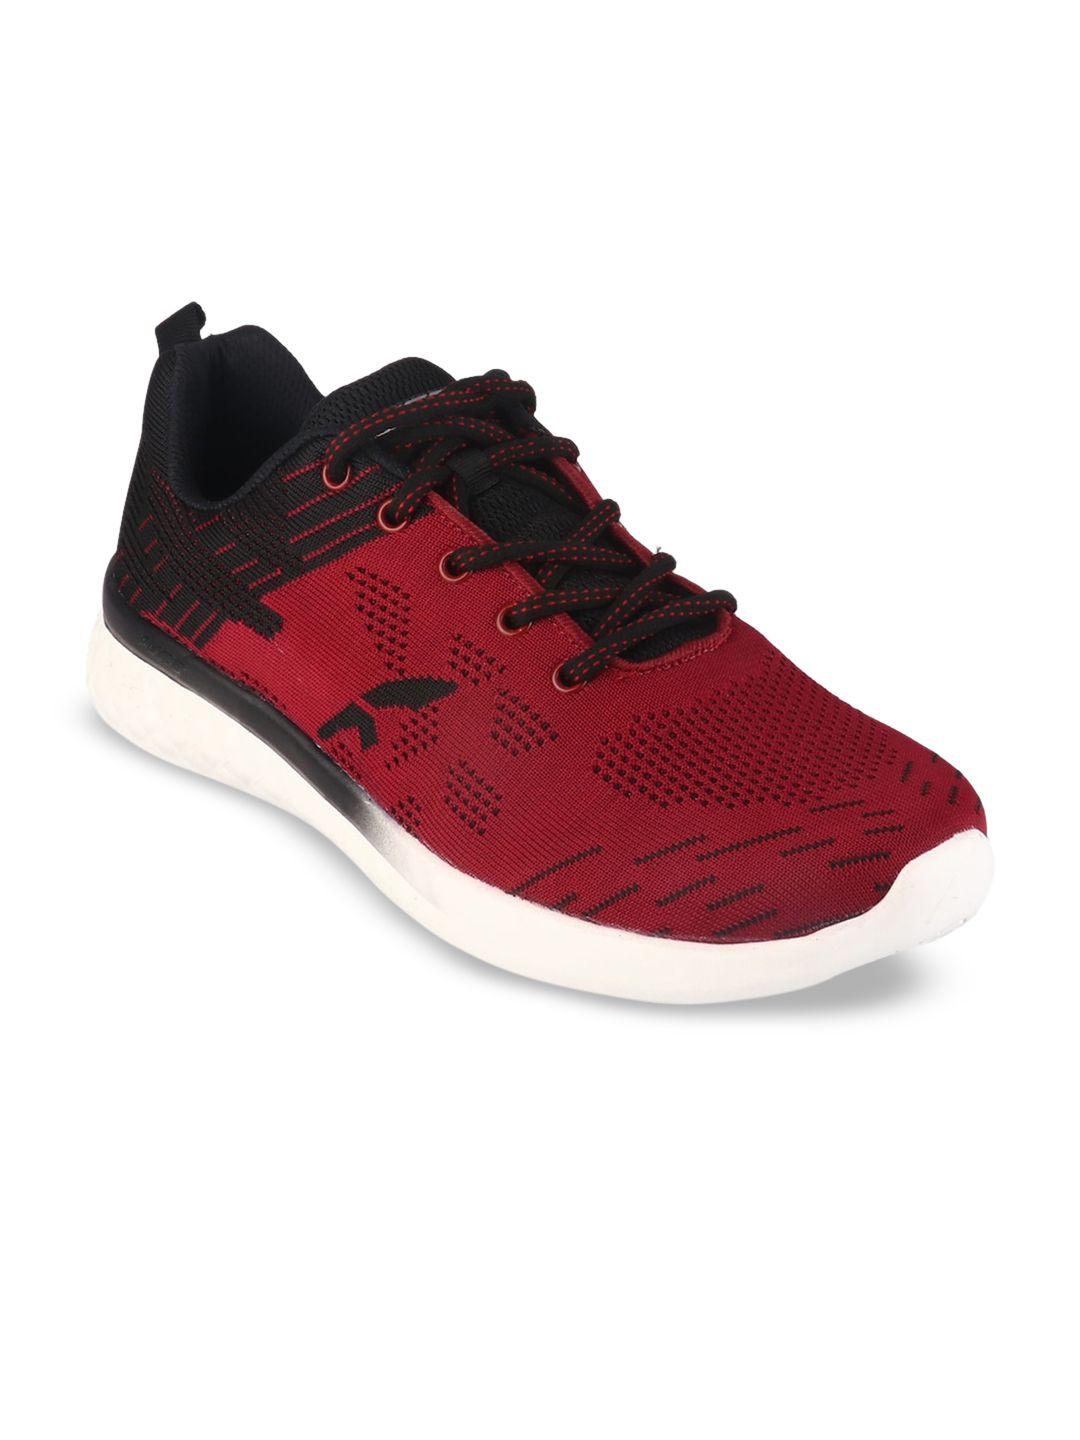 furo by red chief men red & black running sports shoes